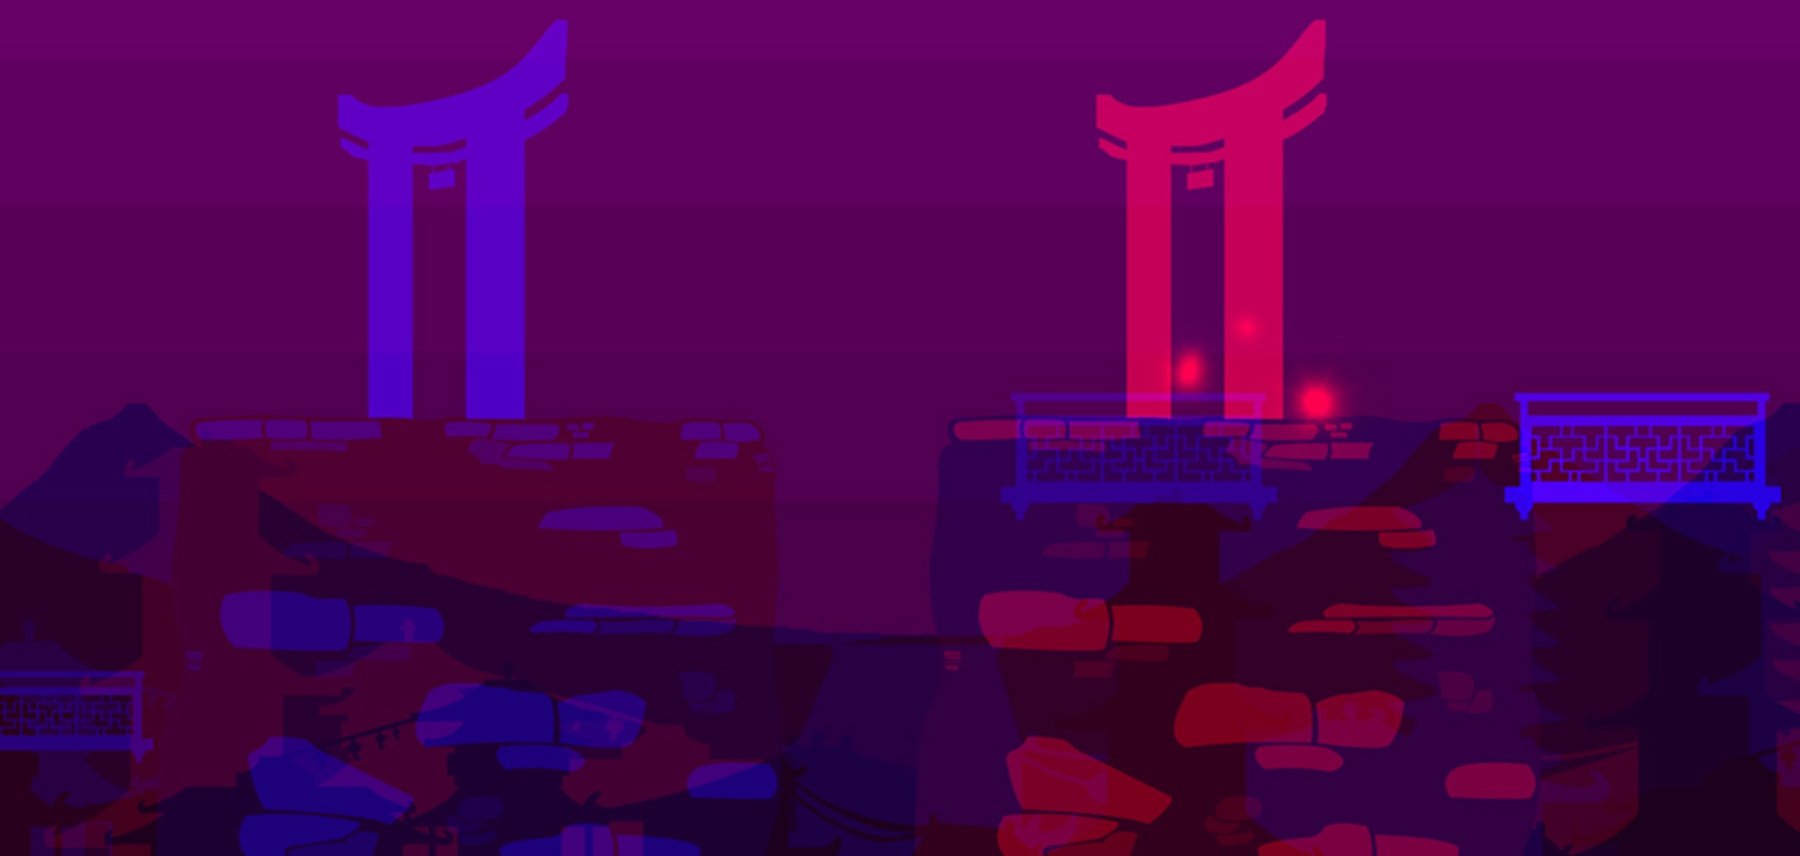 Screenshot of identical arches rendered in blues, reds and purples from Sunder